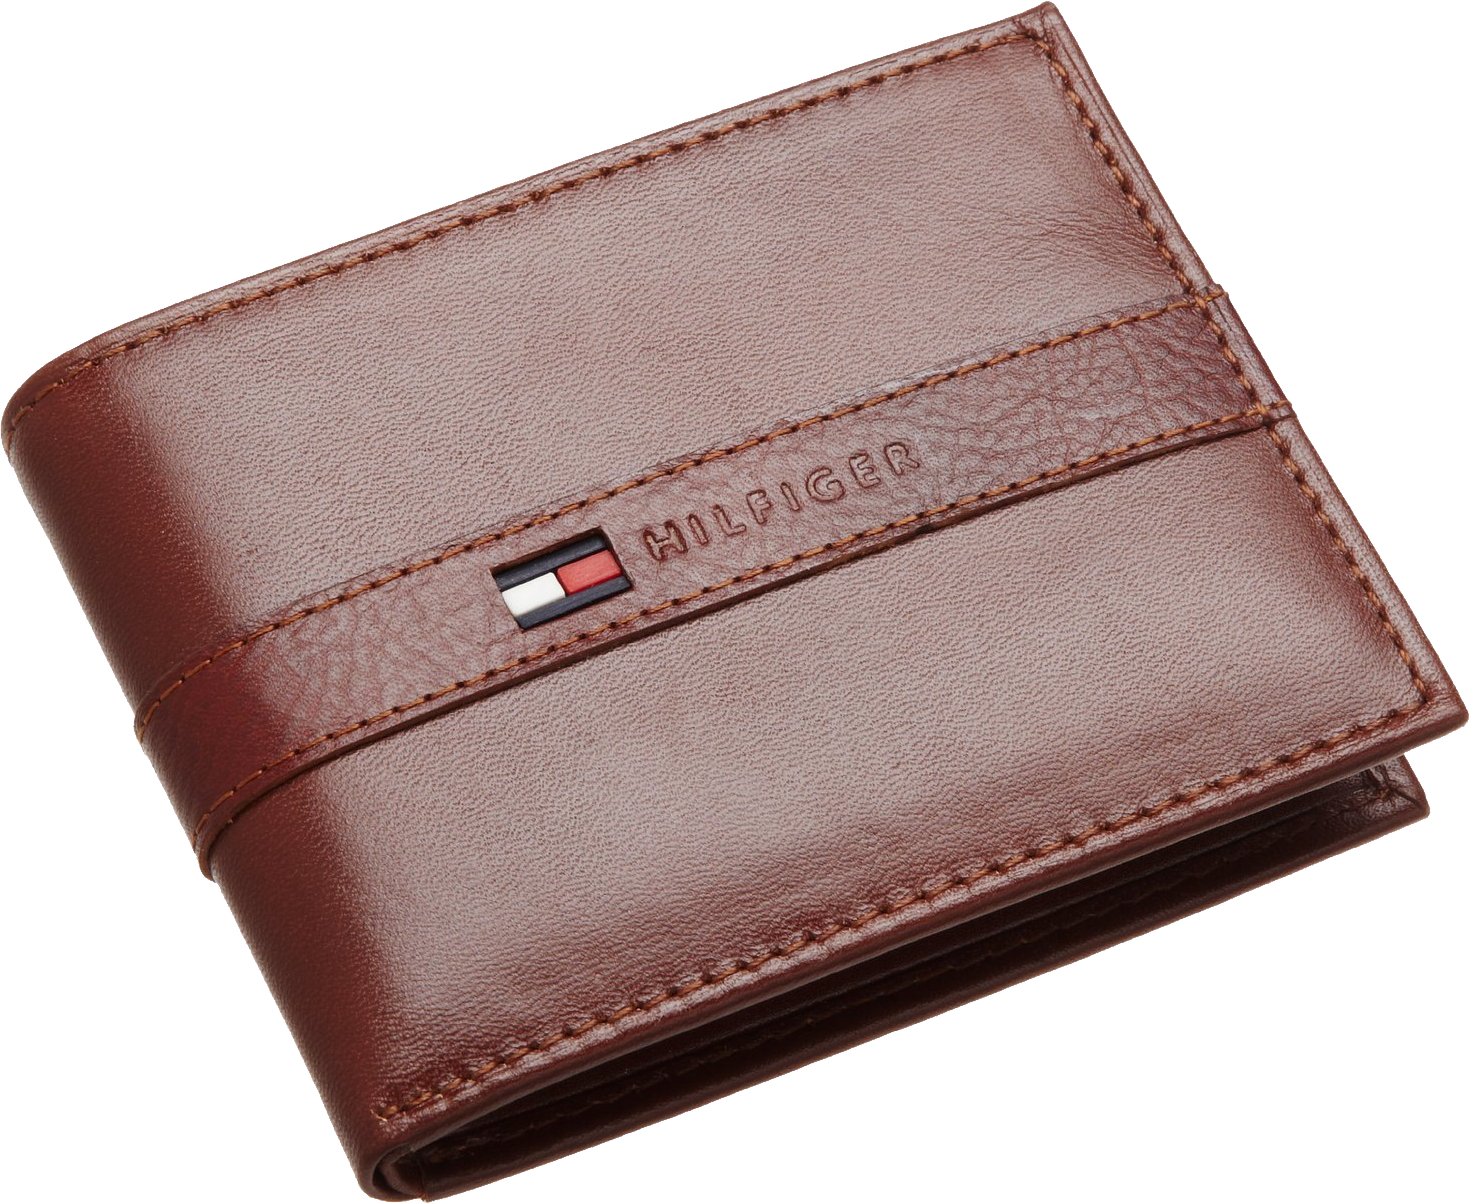 Brown leather wallet PNG image, PNG Wallet - Free PNG